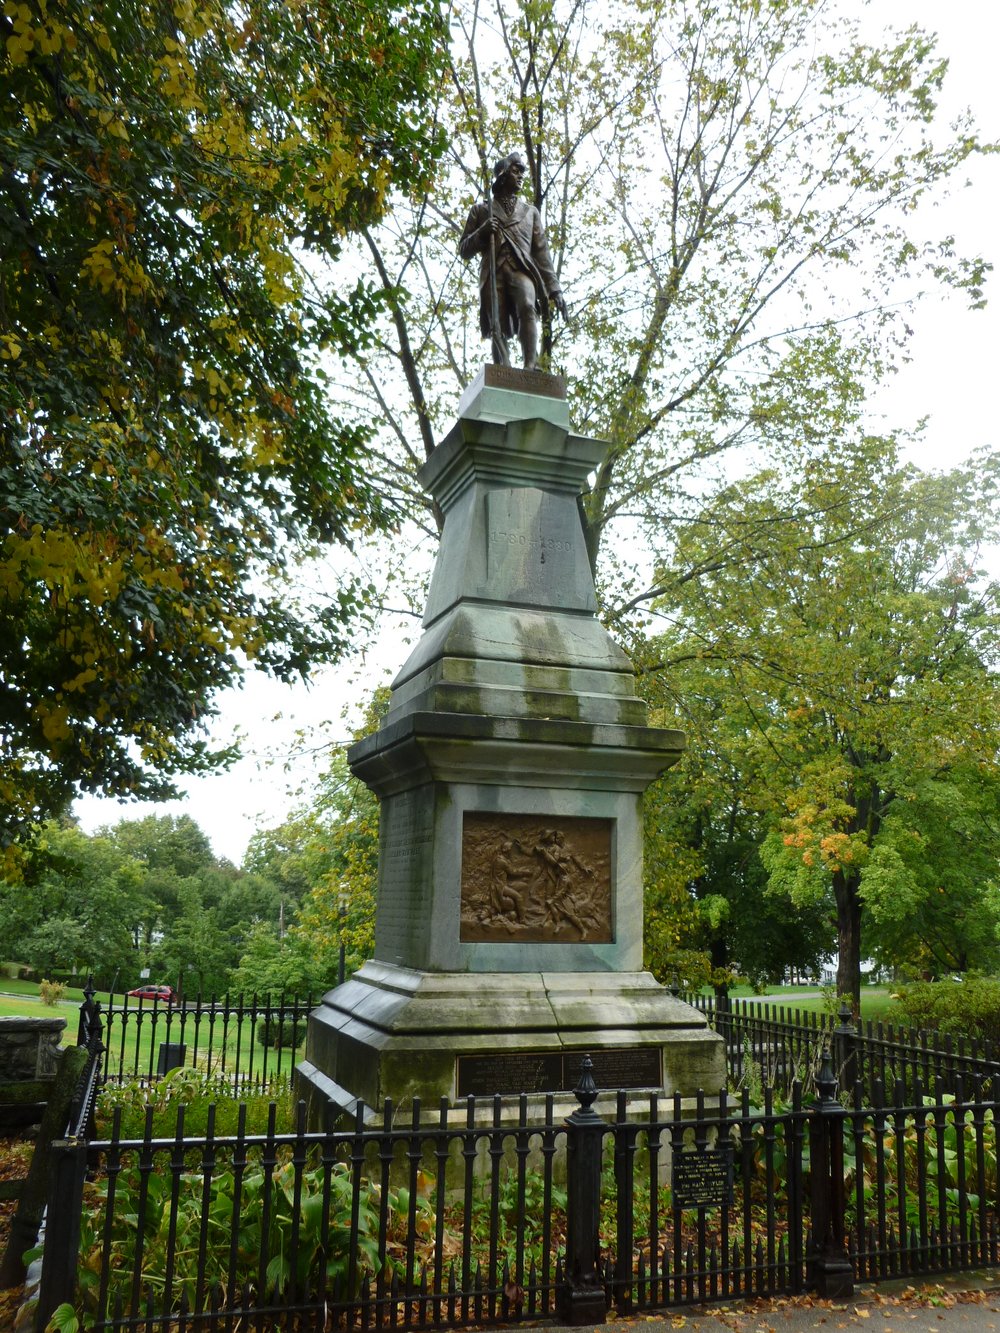 Captor’s Monument, Tarrytown NY. The cornerstone was laid in 1853.